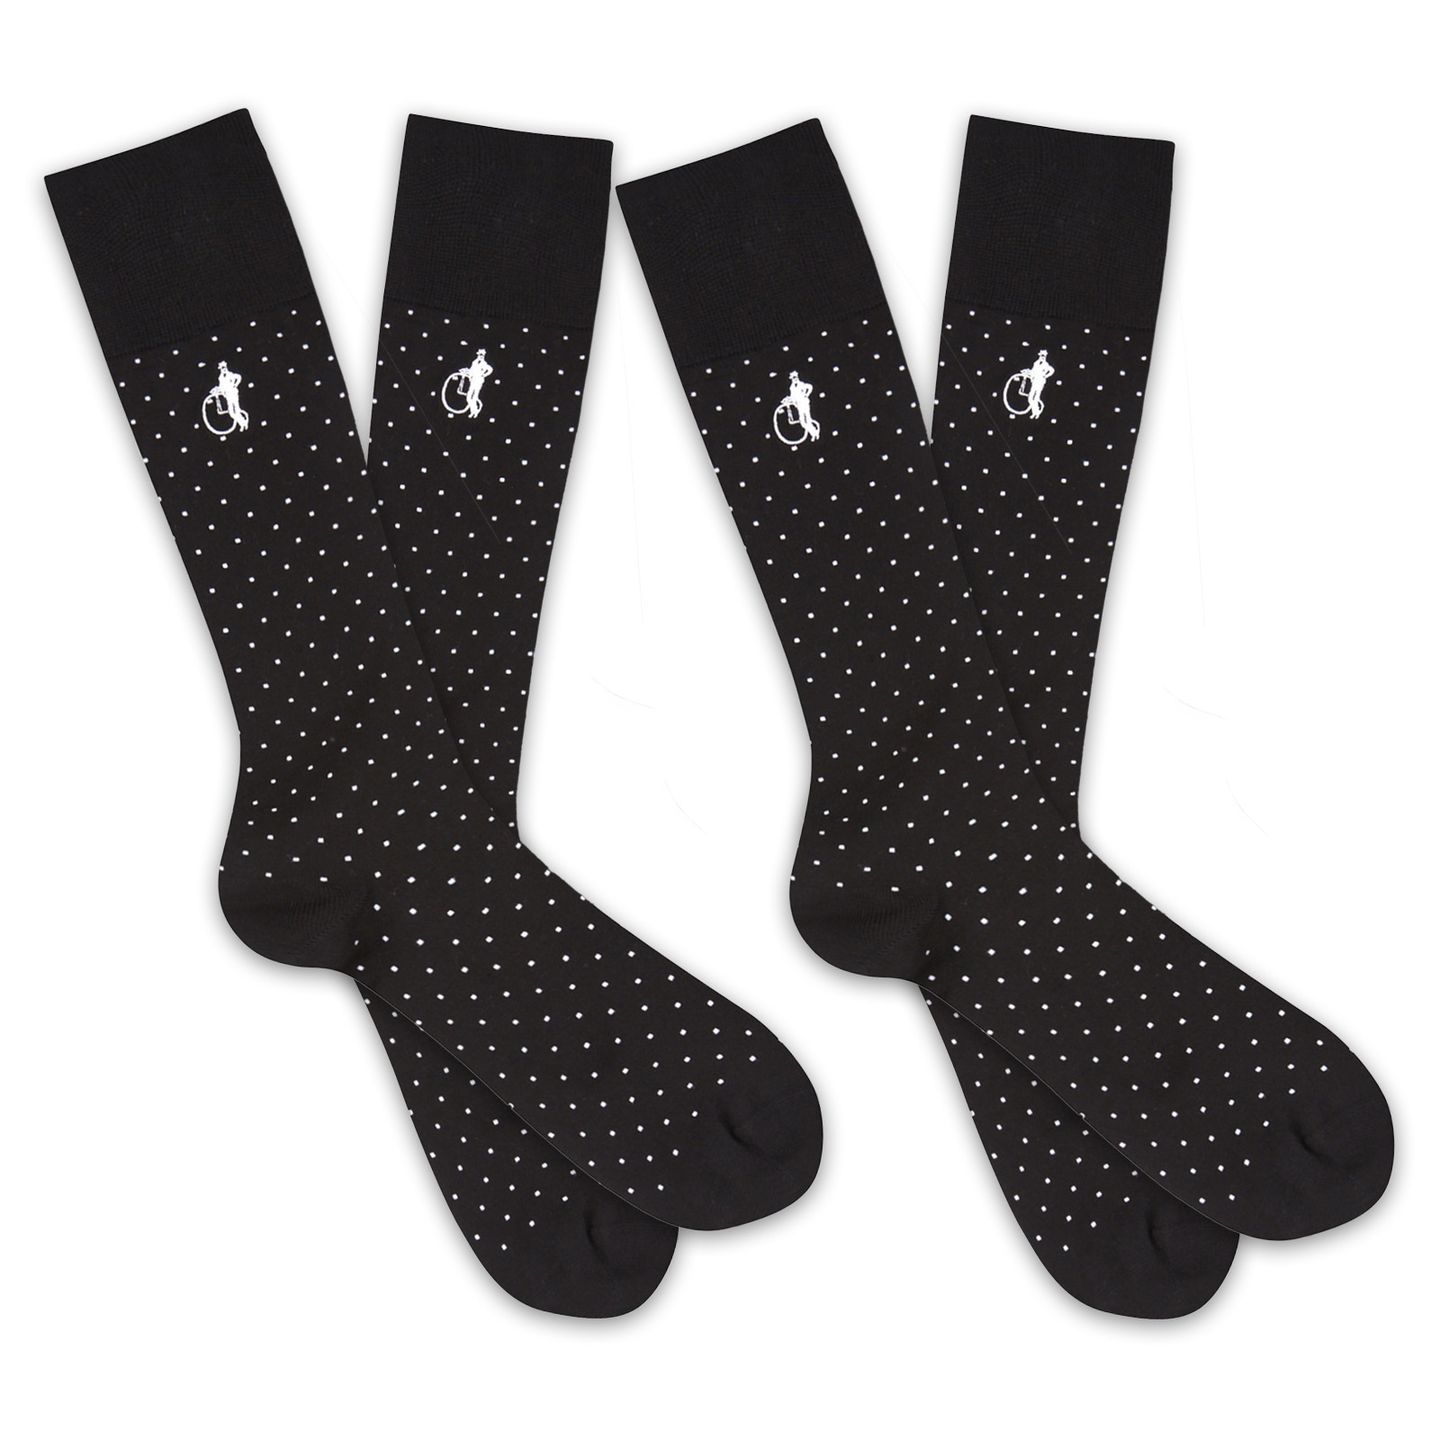 2 pairs of black socks with white polka dots, part of the Spot of Style Collection